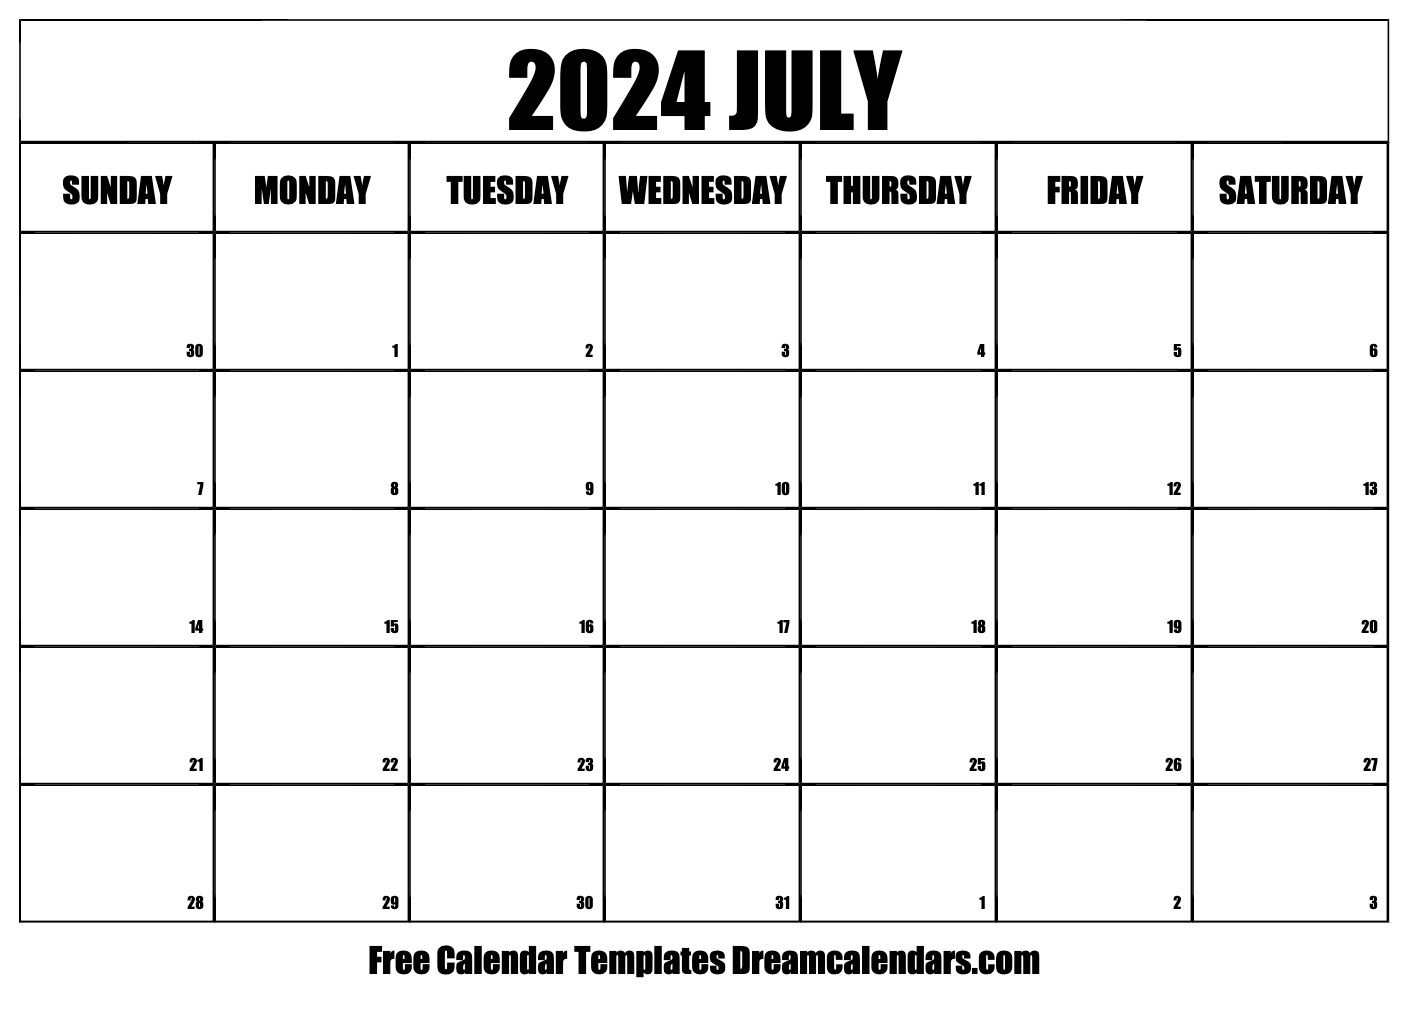 July 2024 Calendar | Free Blank Printable With Holidays for July 2024 Printable Calendar Free